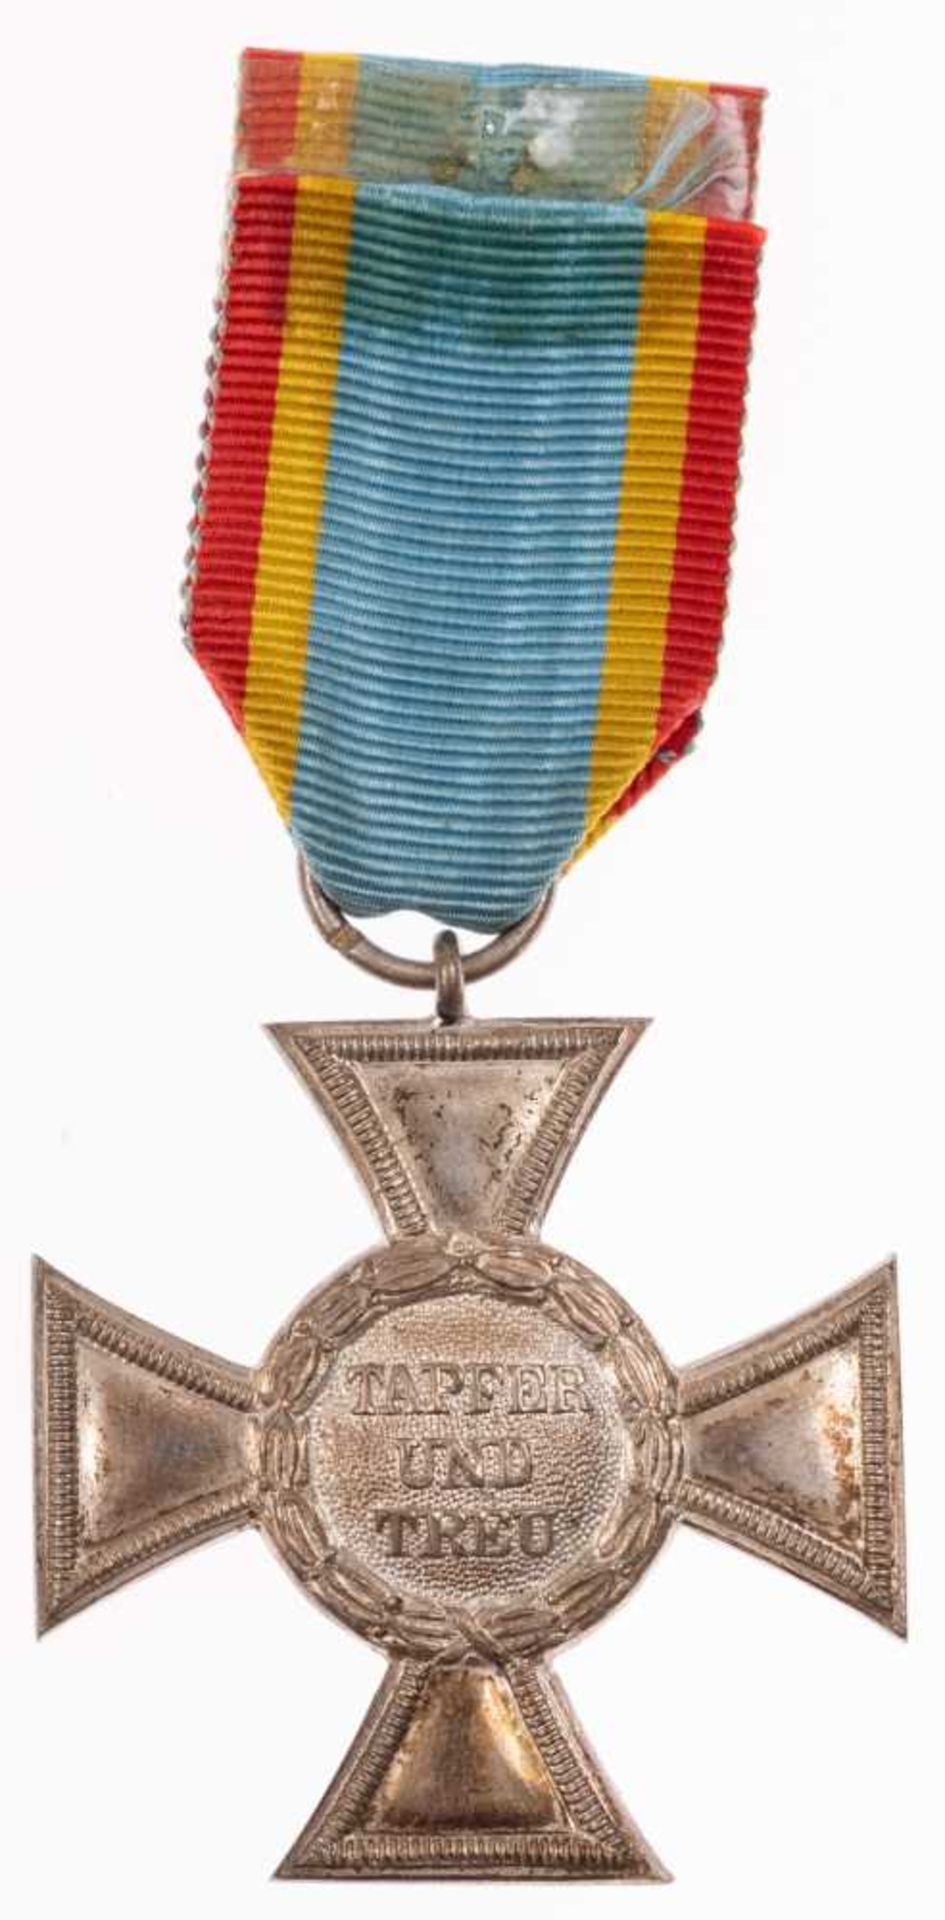 Mecklenburg Strelitz, cross for award in the wares 2. Class, \\brave and faithful\\, at the volume f - Image 2 of 2